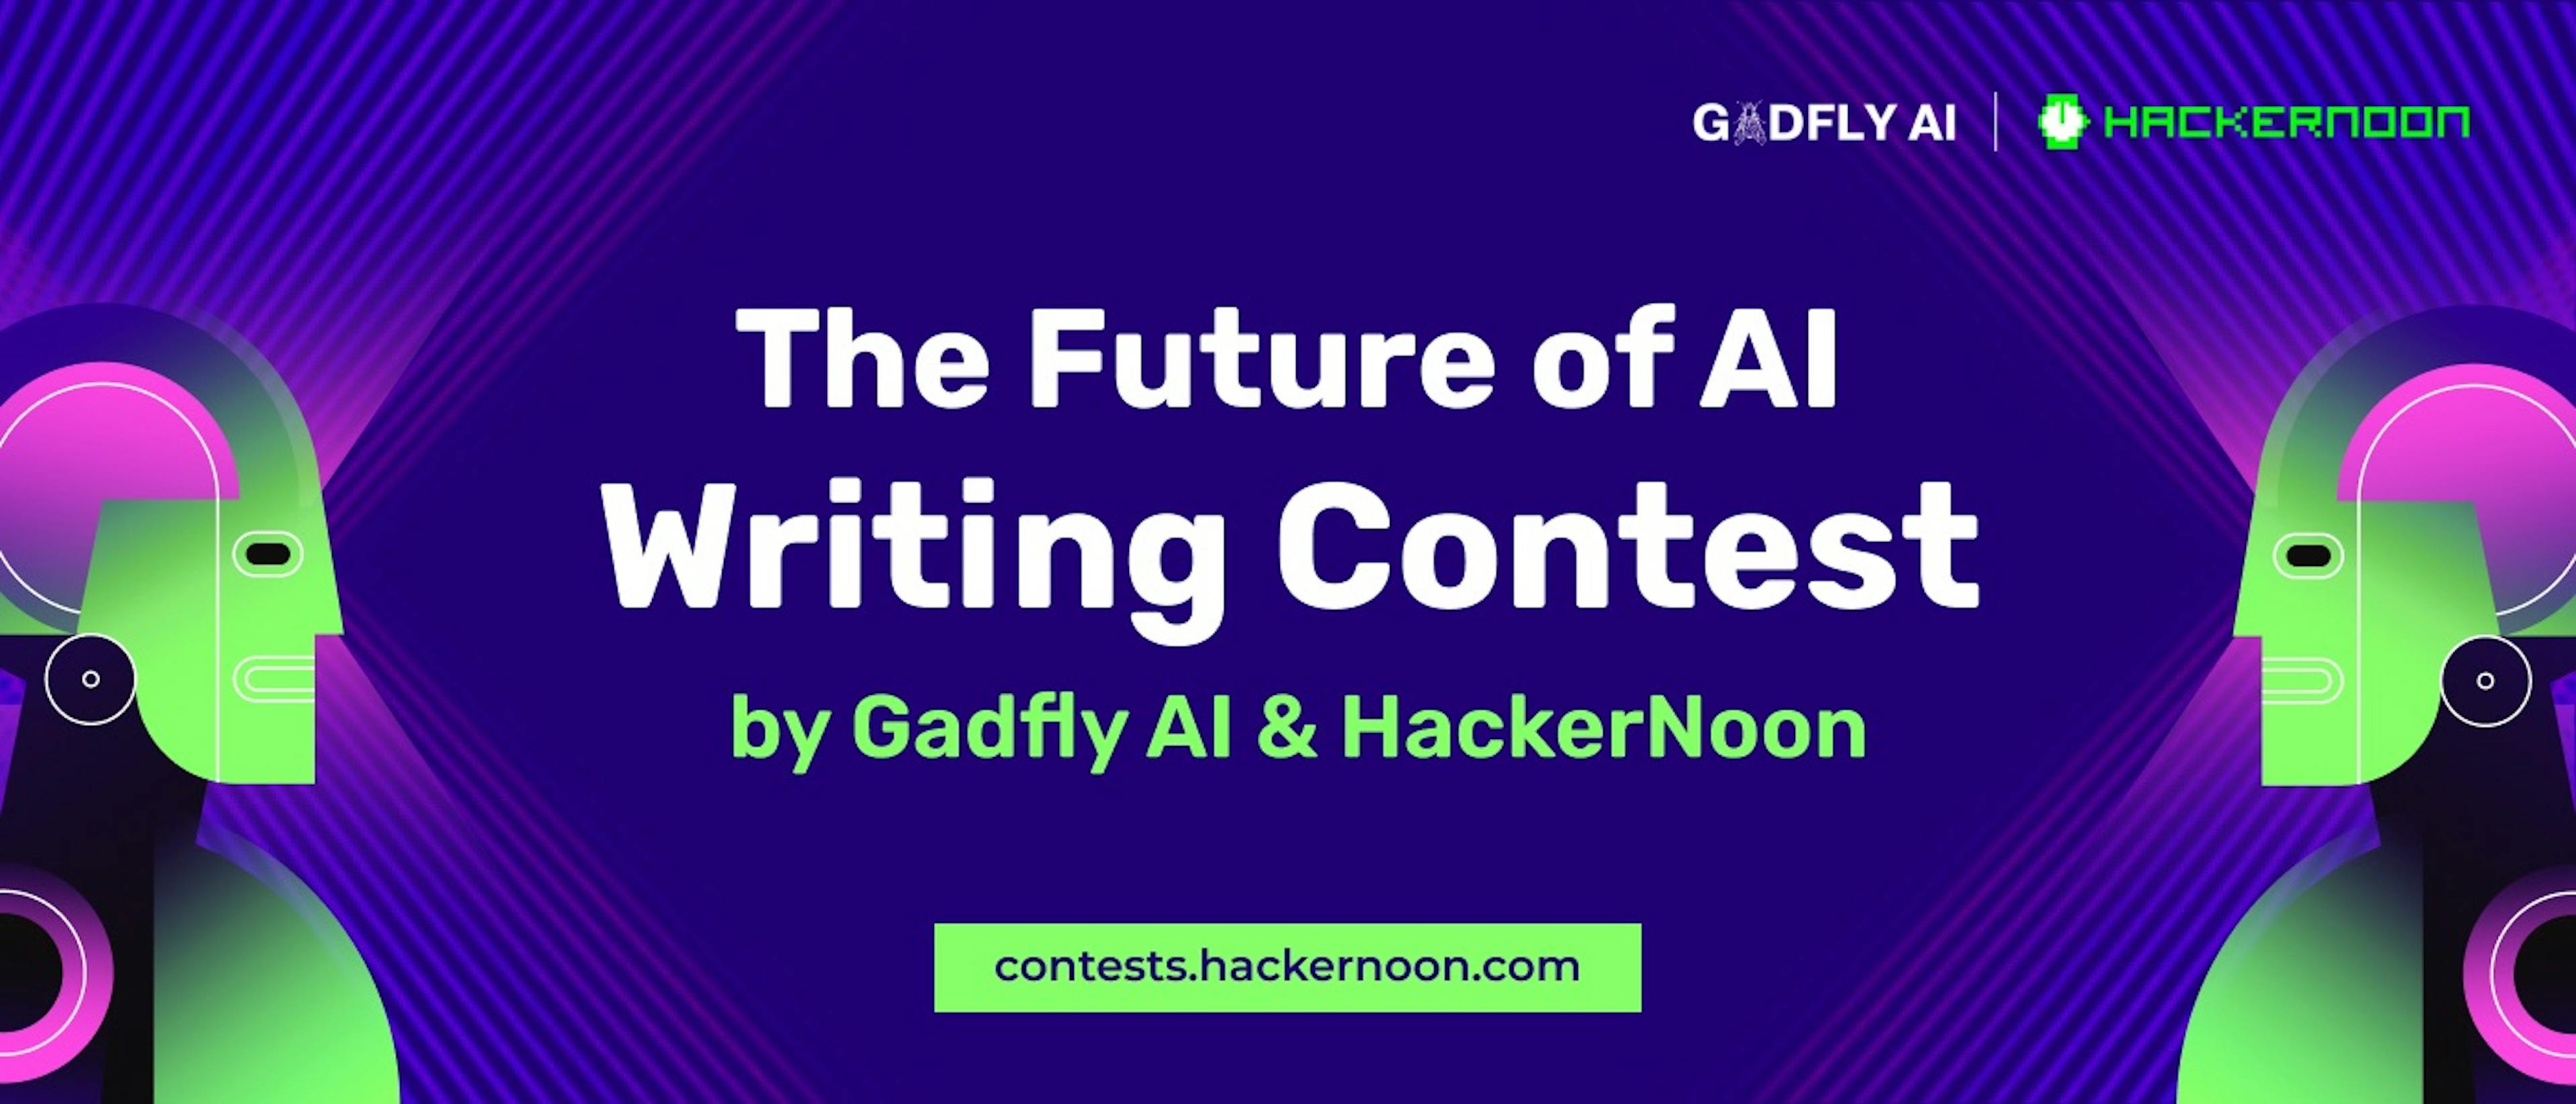 featured image - The Future of AI Writing Contest by GadflyAI: Winner Announced!